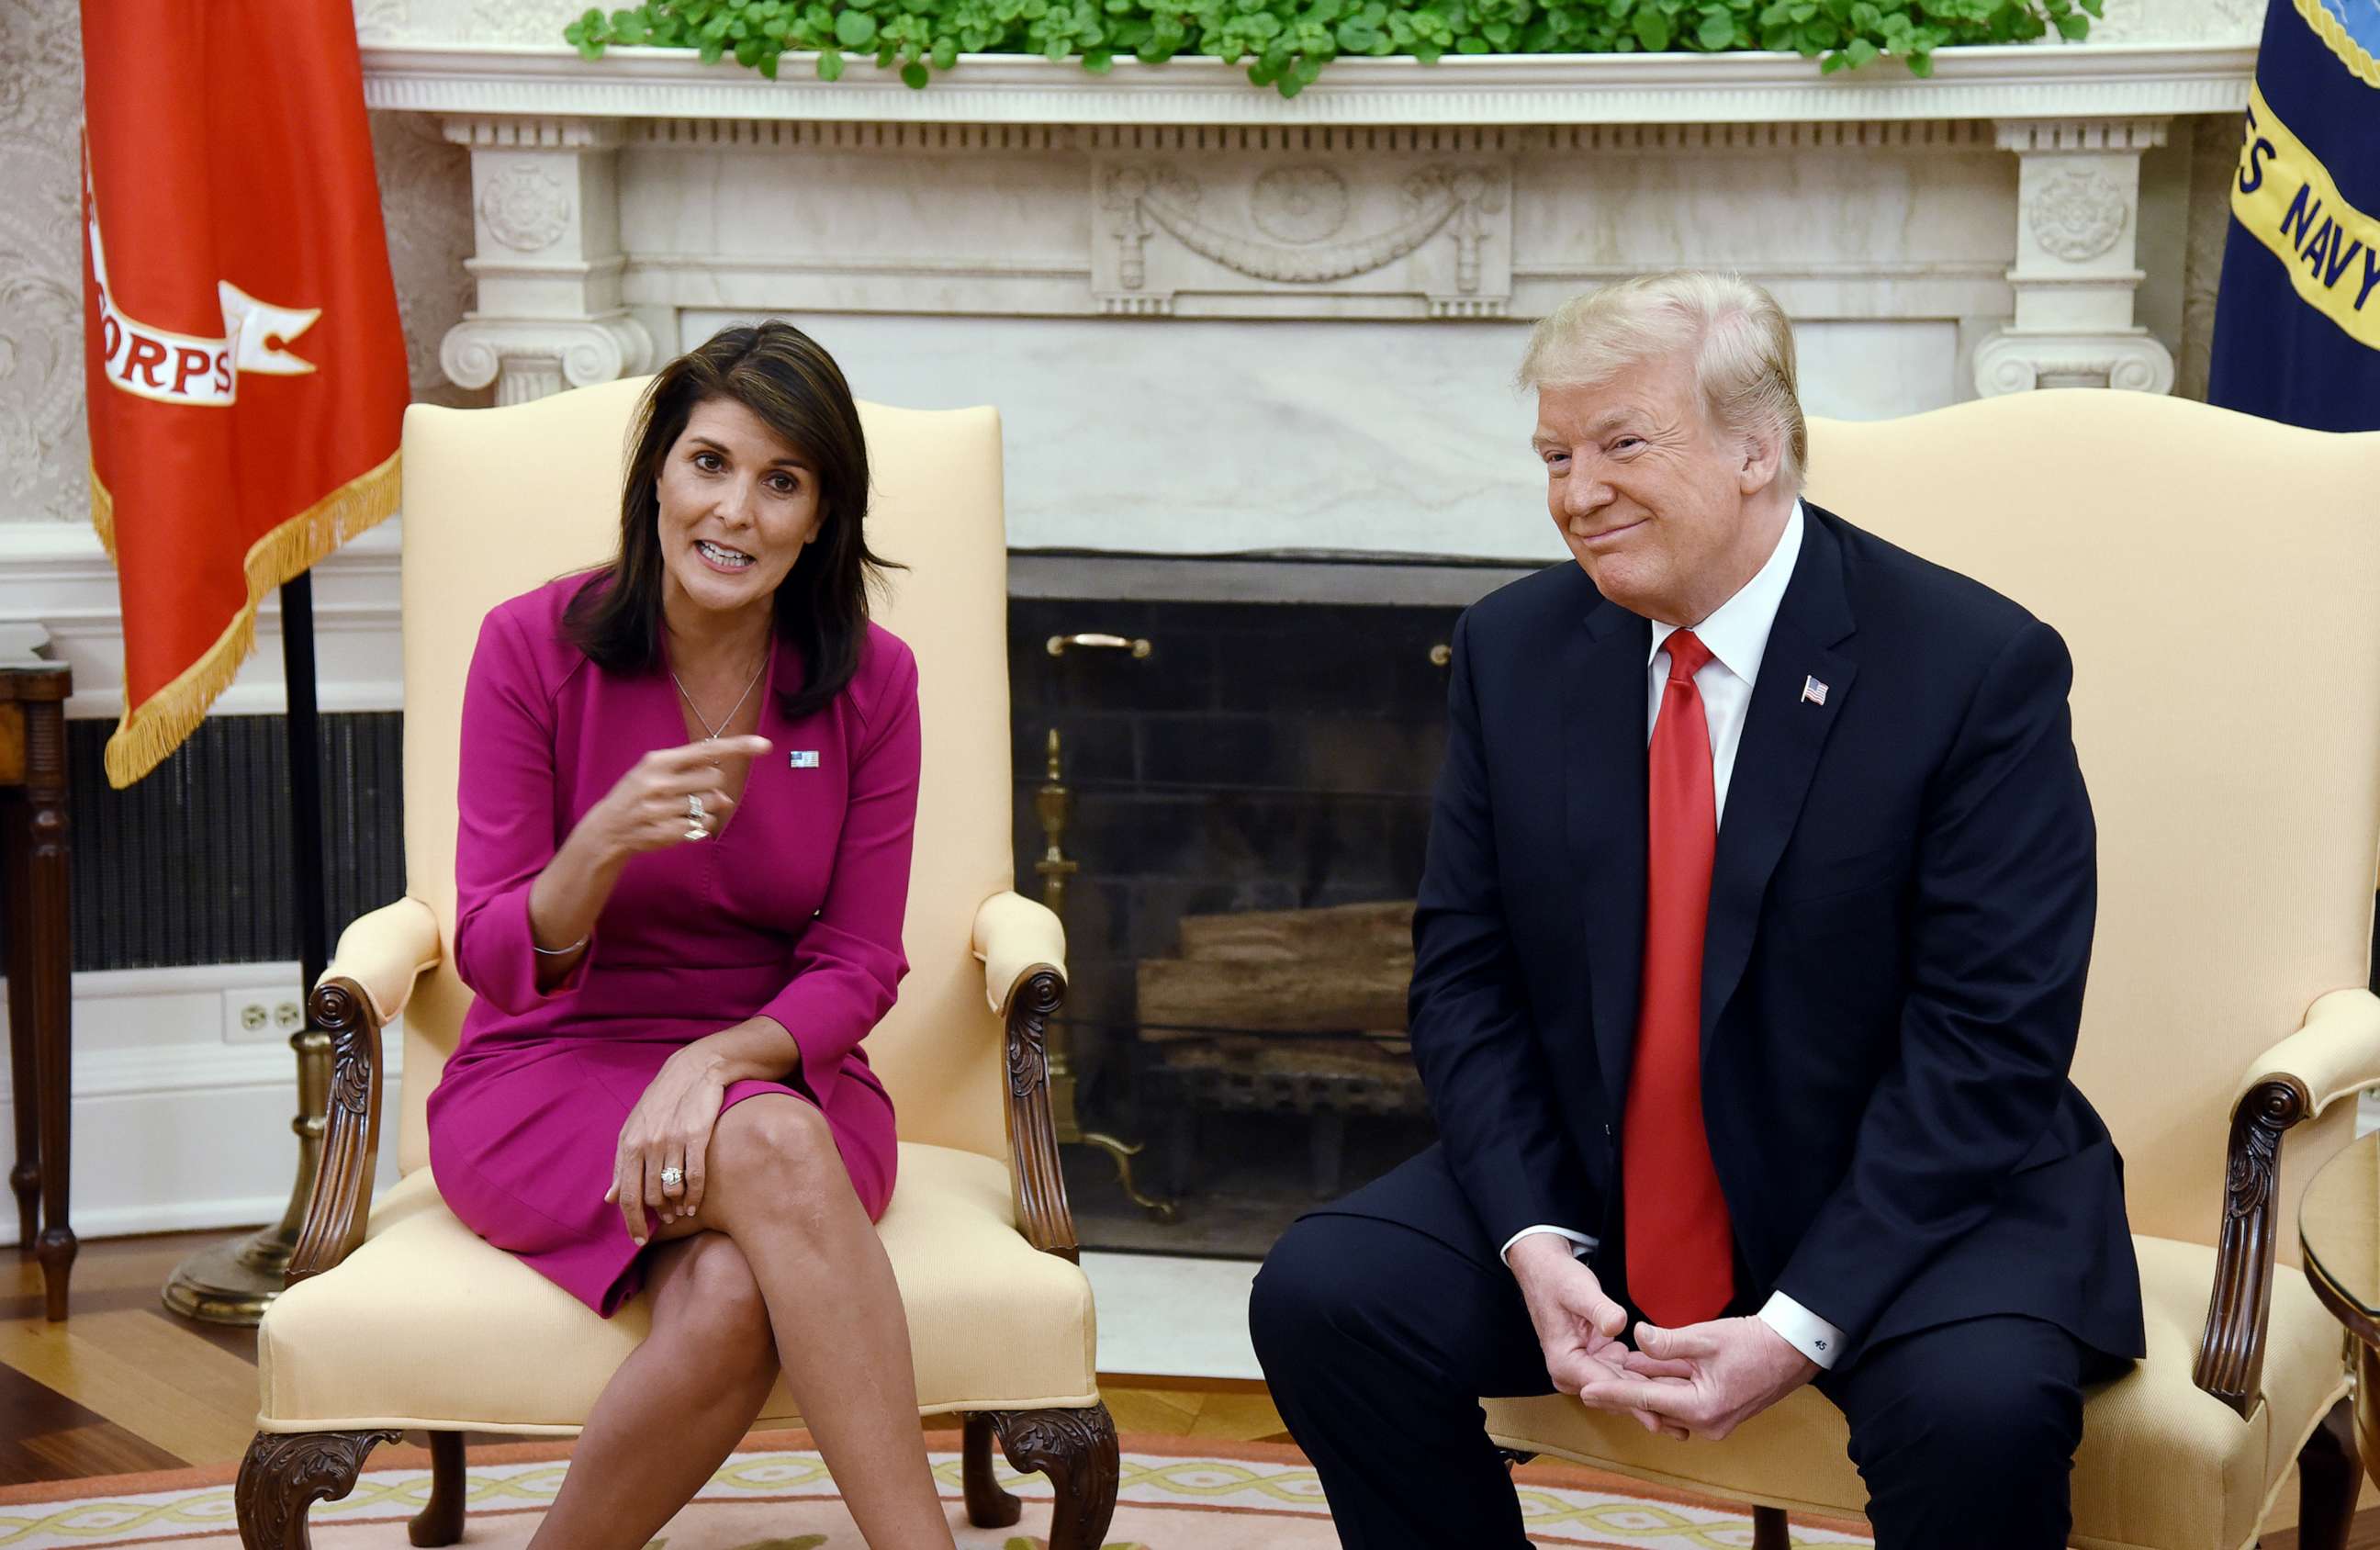 PHOTO: President Donald Trump meets with Nikki Haley, the United States Ambassador to the United Nations in the Oval office of the White House, Oct. 9, 2018.